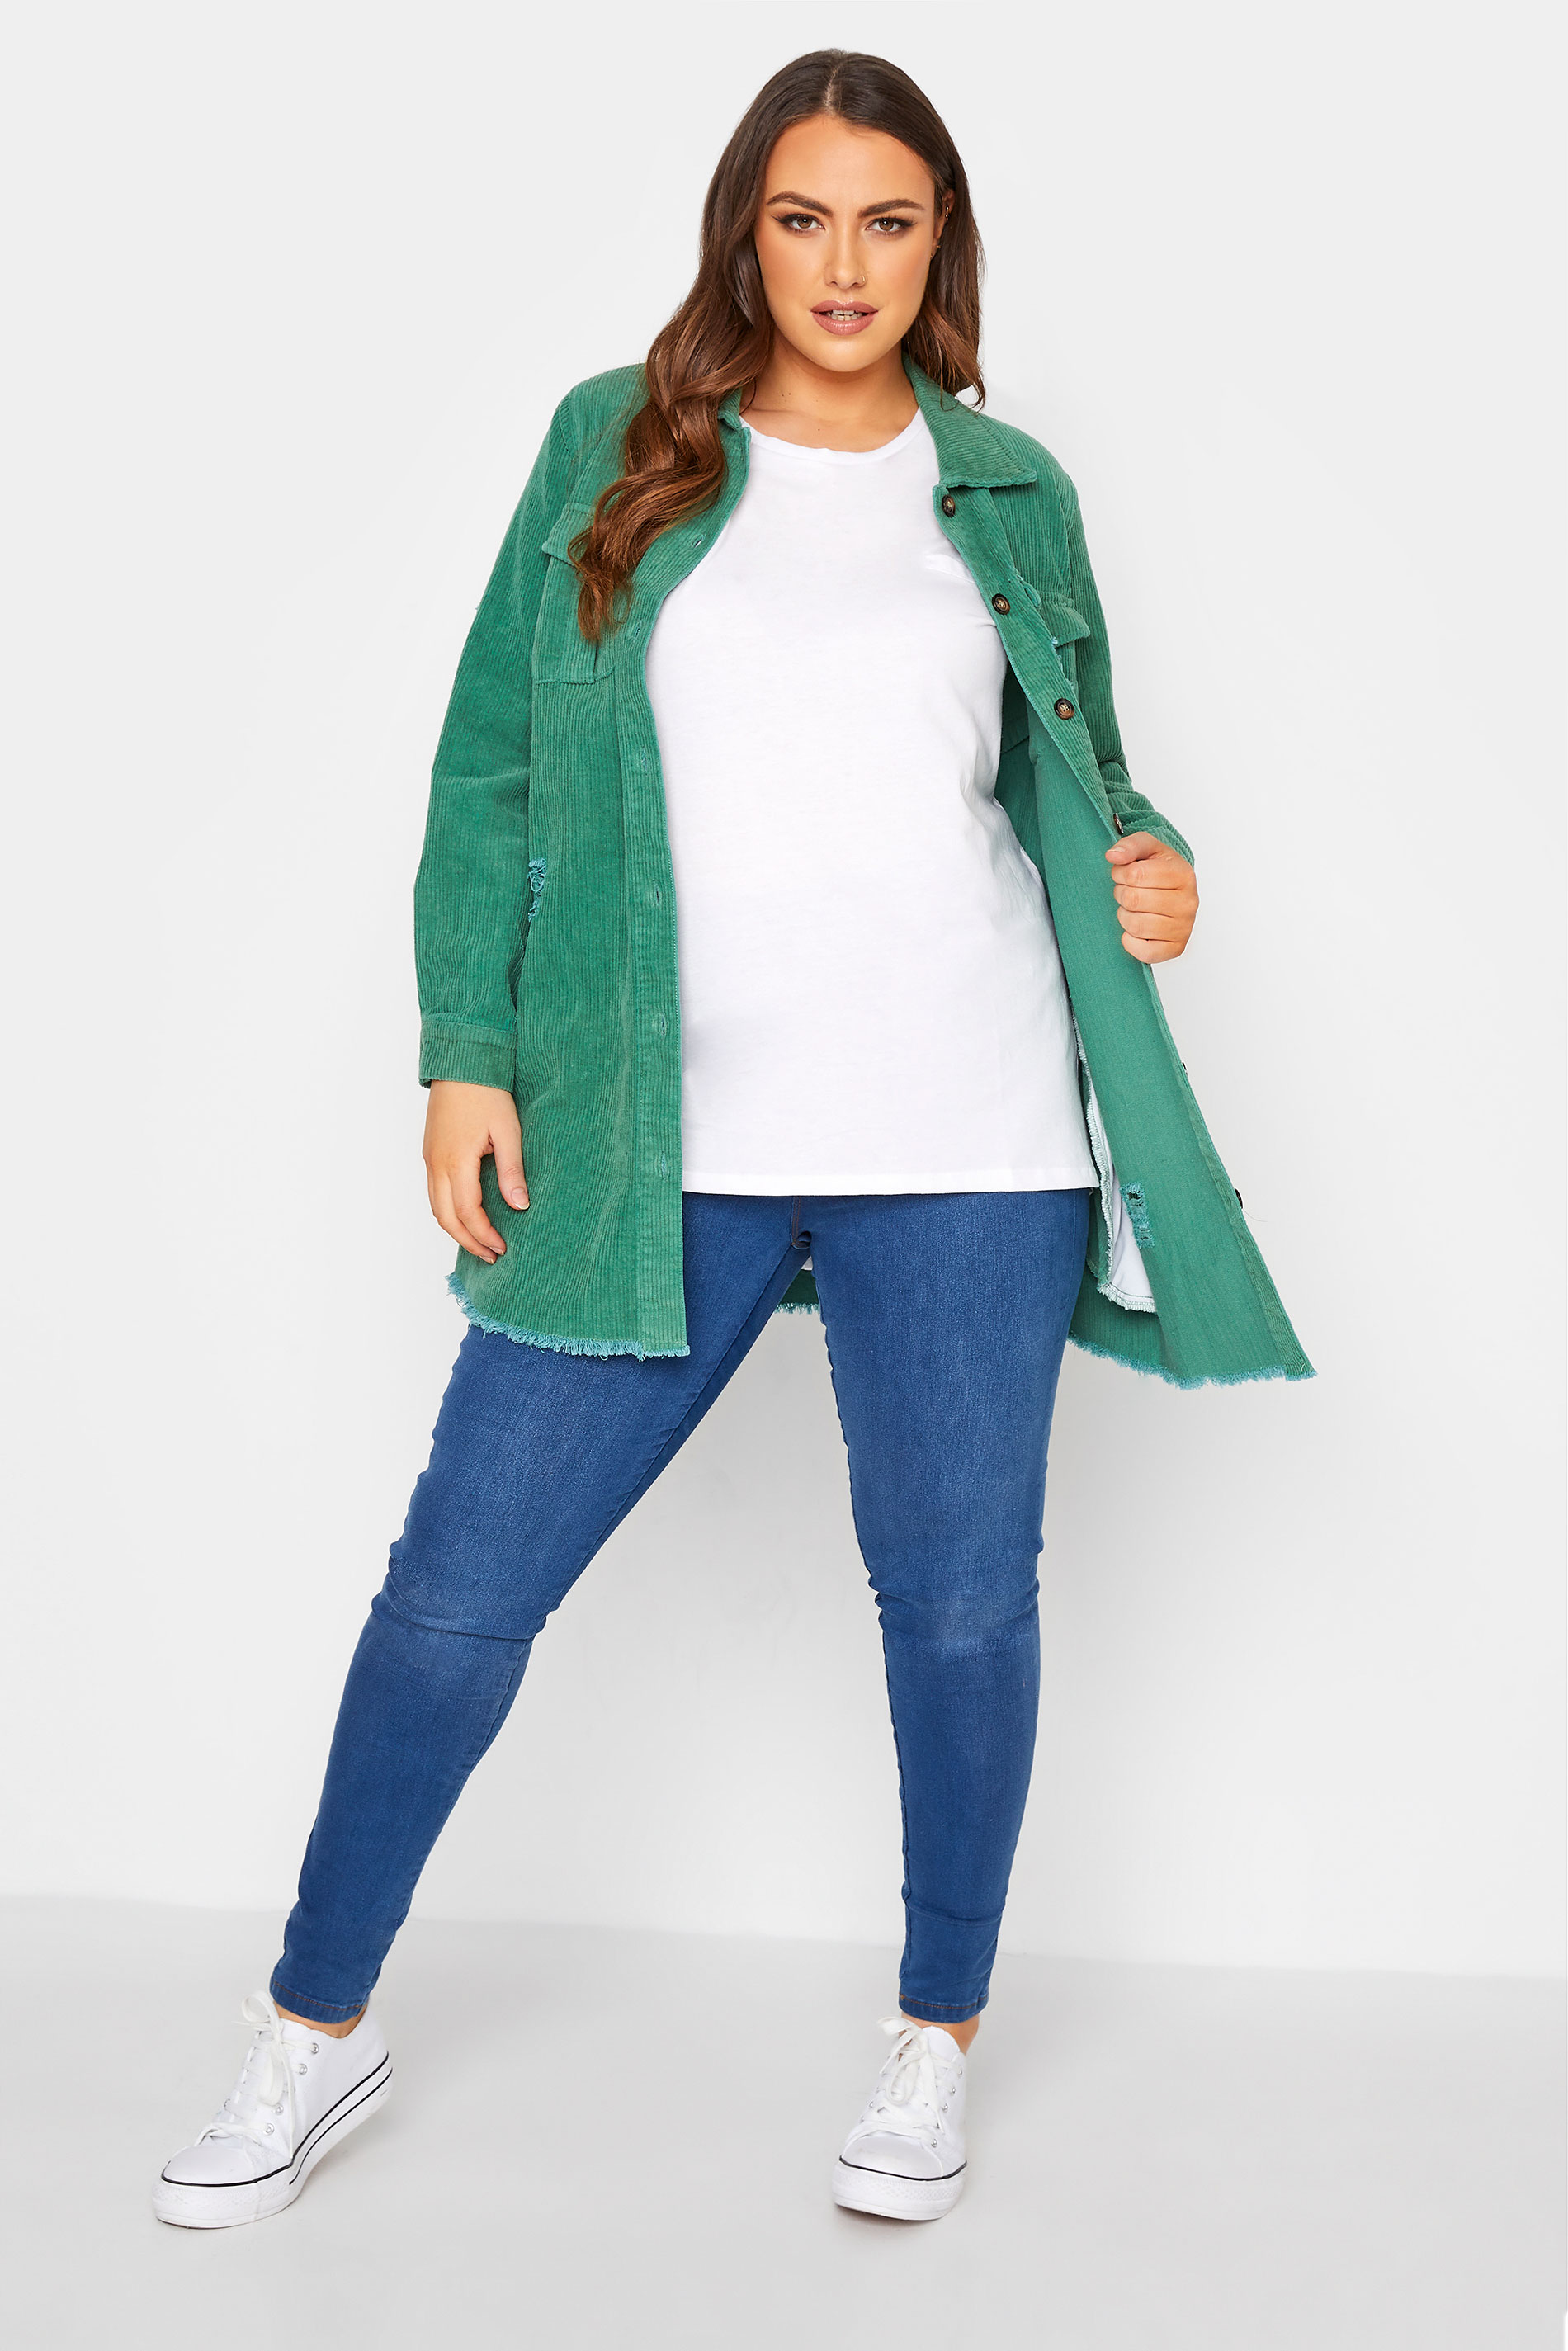 Grande taille  Tops Grande taille  Tops Casual | YOURS FOR GOOD - T-Shirt Blanc en Coton Mixte - XK21093